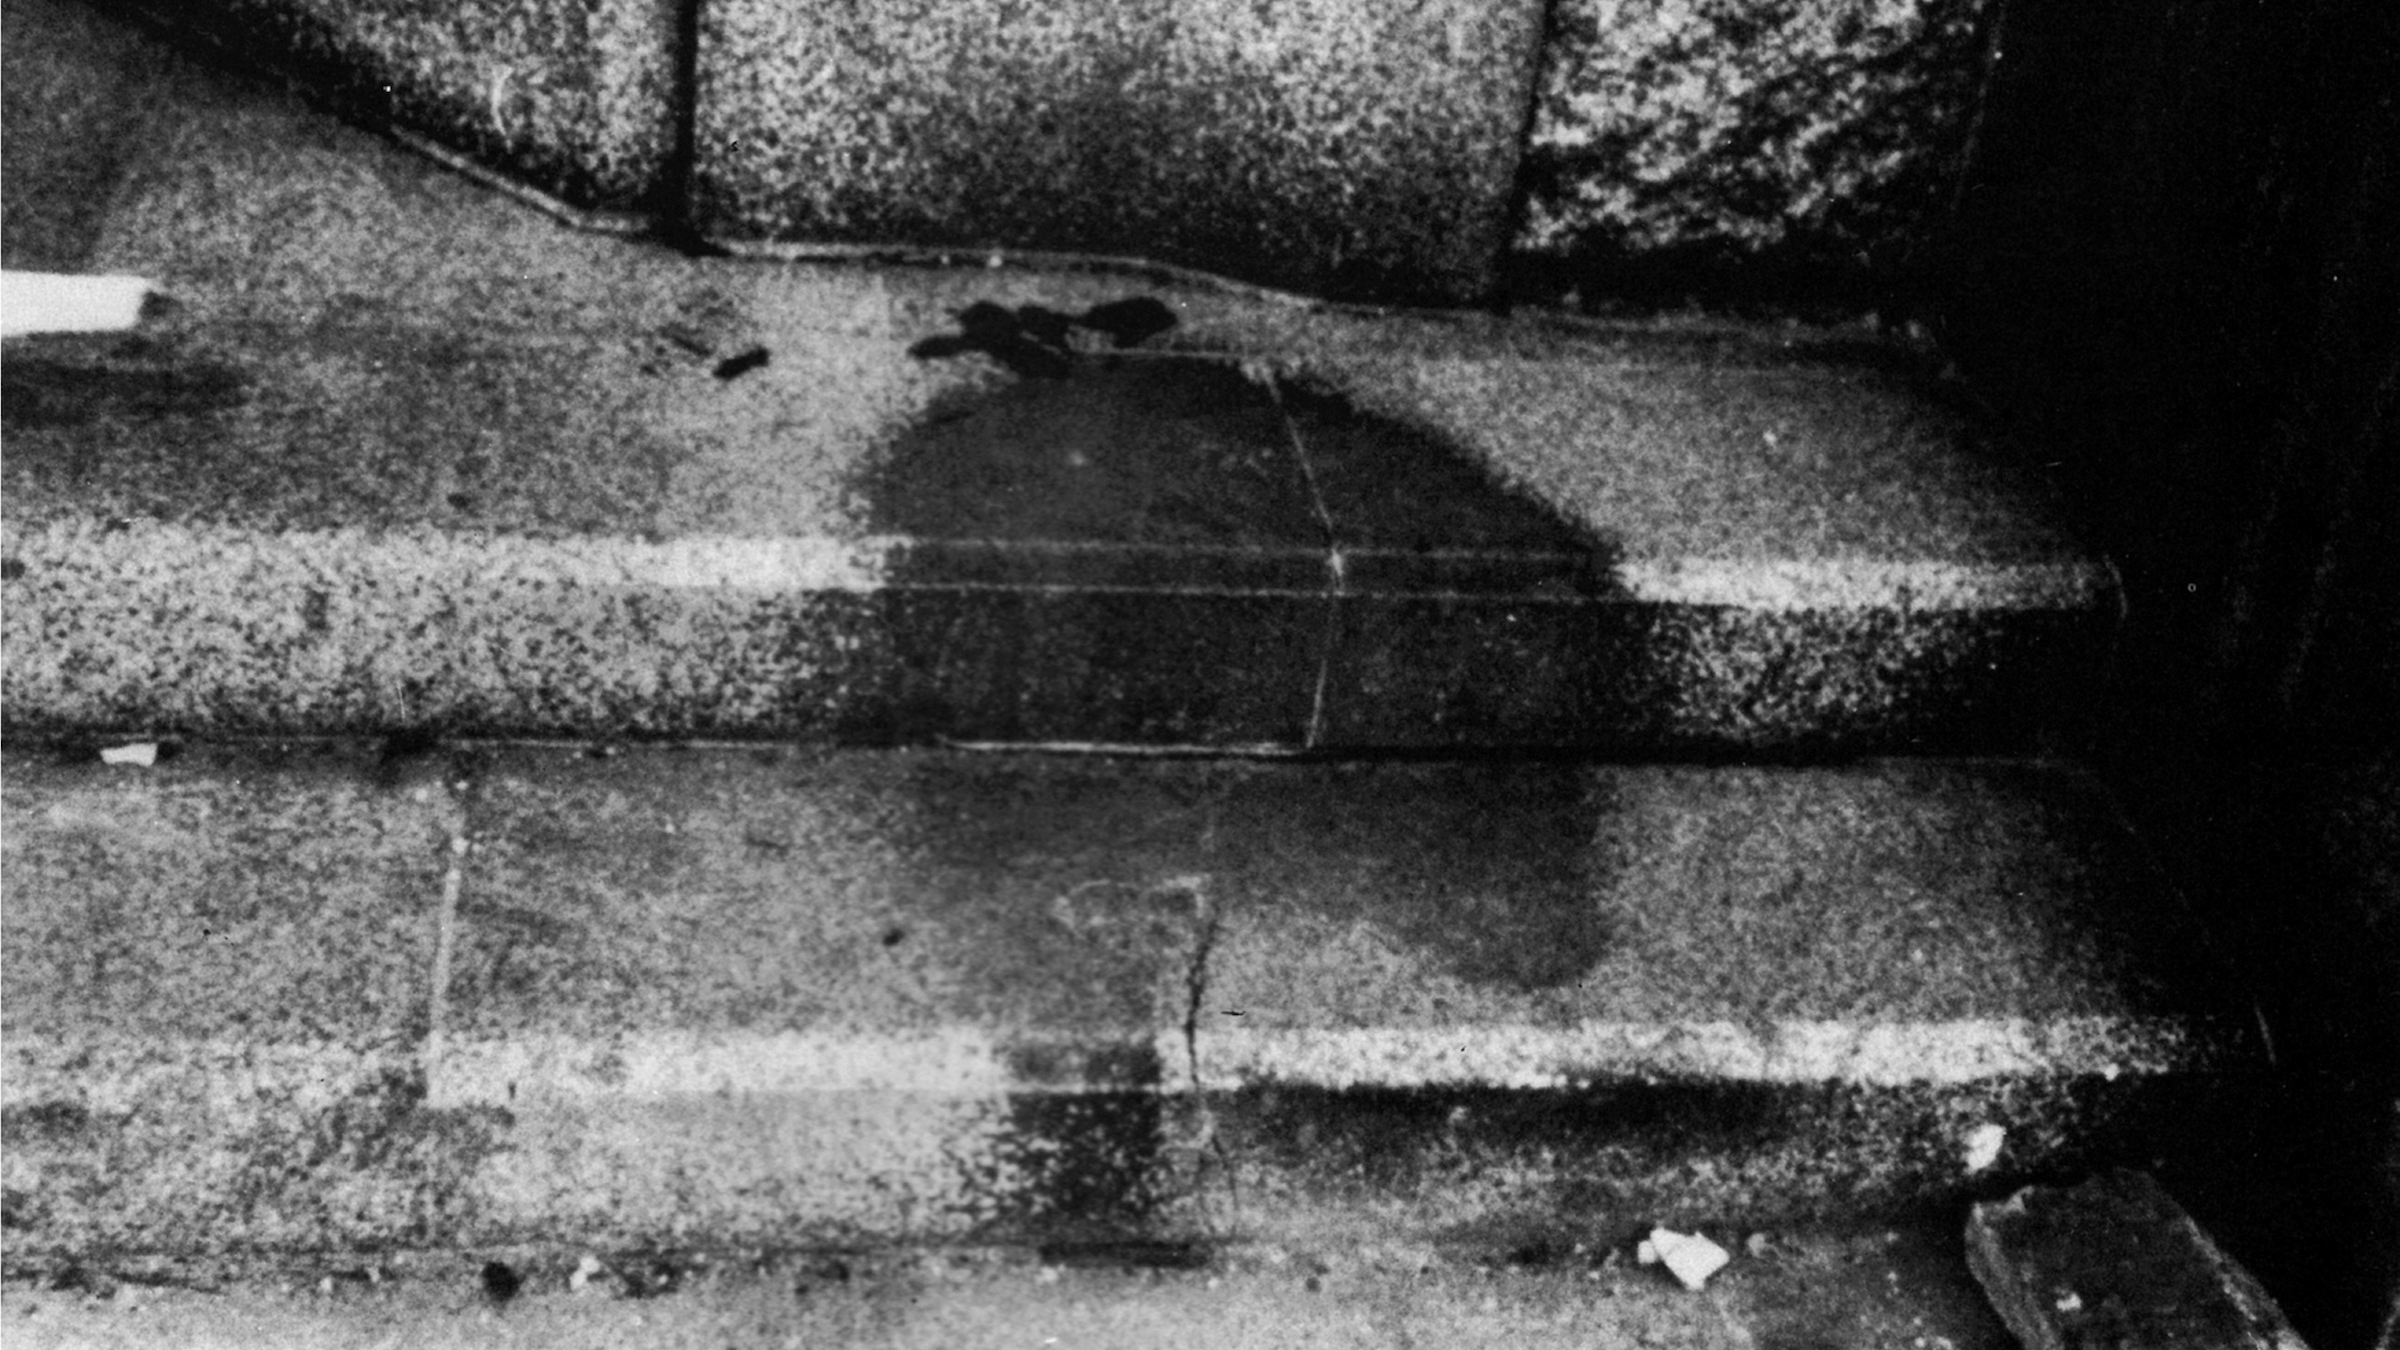 A human shadow on the steps of a bank in Hiroshima, following the explosion of the nuclear bomb in August 1945.